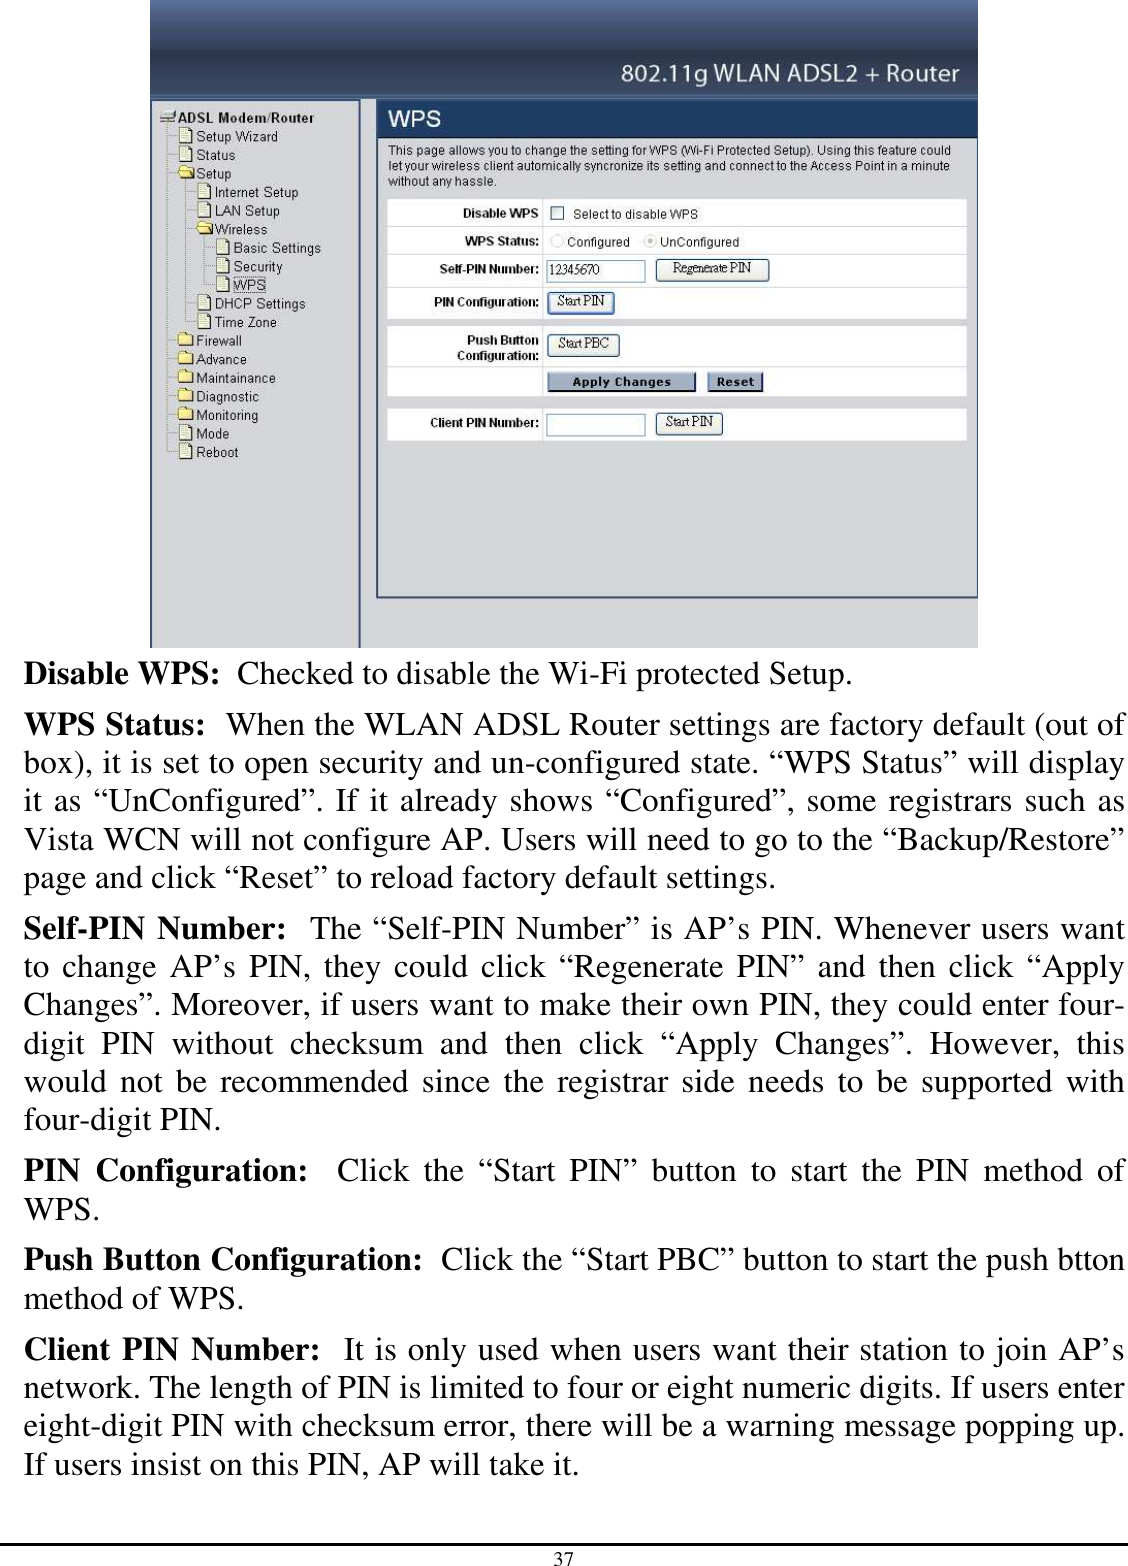 37  Disable WPS:  Checked to disable the Wi-Fi protected Setup. WPS Status:  When the WLAN ADSL Router settings are factory default (out of box), it is set to open security and un-configured state. “WPS Status” will display it as “UnConfigured”. If it already shows “Configured”, some registrars such as Vista WCN will not configure AP. Users will need to go to the “Backup/Restore” page and click “Reset” to reload factory default settings. Self-PIN Number:  The “Self-PIN Number” is AP’s PIN. Whenever users want to change AP’s PIN, they could click “Regenerate PIN” and then click “Apply Changes”. Moreover, if users want to make their own PIN, they could enter four-digit  PIN  without  checksum  and  then  click  “Apply  Changes”.  However,  this would  not  be recommended since the registrar side needs to be supported with four-digit PIN. PIN  Configuration:    Click  the  “Start  PIN”  button  to  start  the  PIN  method  of WPS. Push Button Configuration:  Click the “Start PBC” button to start the push btton method of WPS. Client PIN Number:  It is only used when users want their station to join AP’s network. The length of PIN is limited to four or eight numeric digits. If users enter eight-digit PIN with checksum error, there will be a warning message popping up. If users insist on this PIN, AP will take it. 